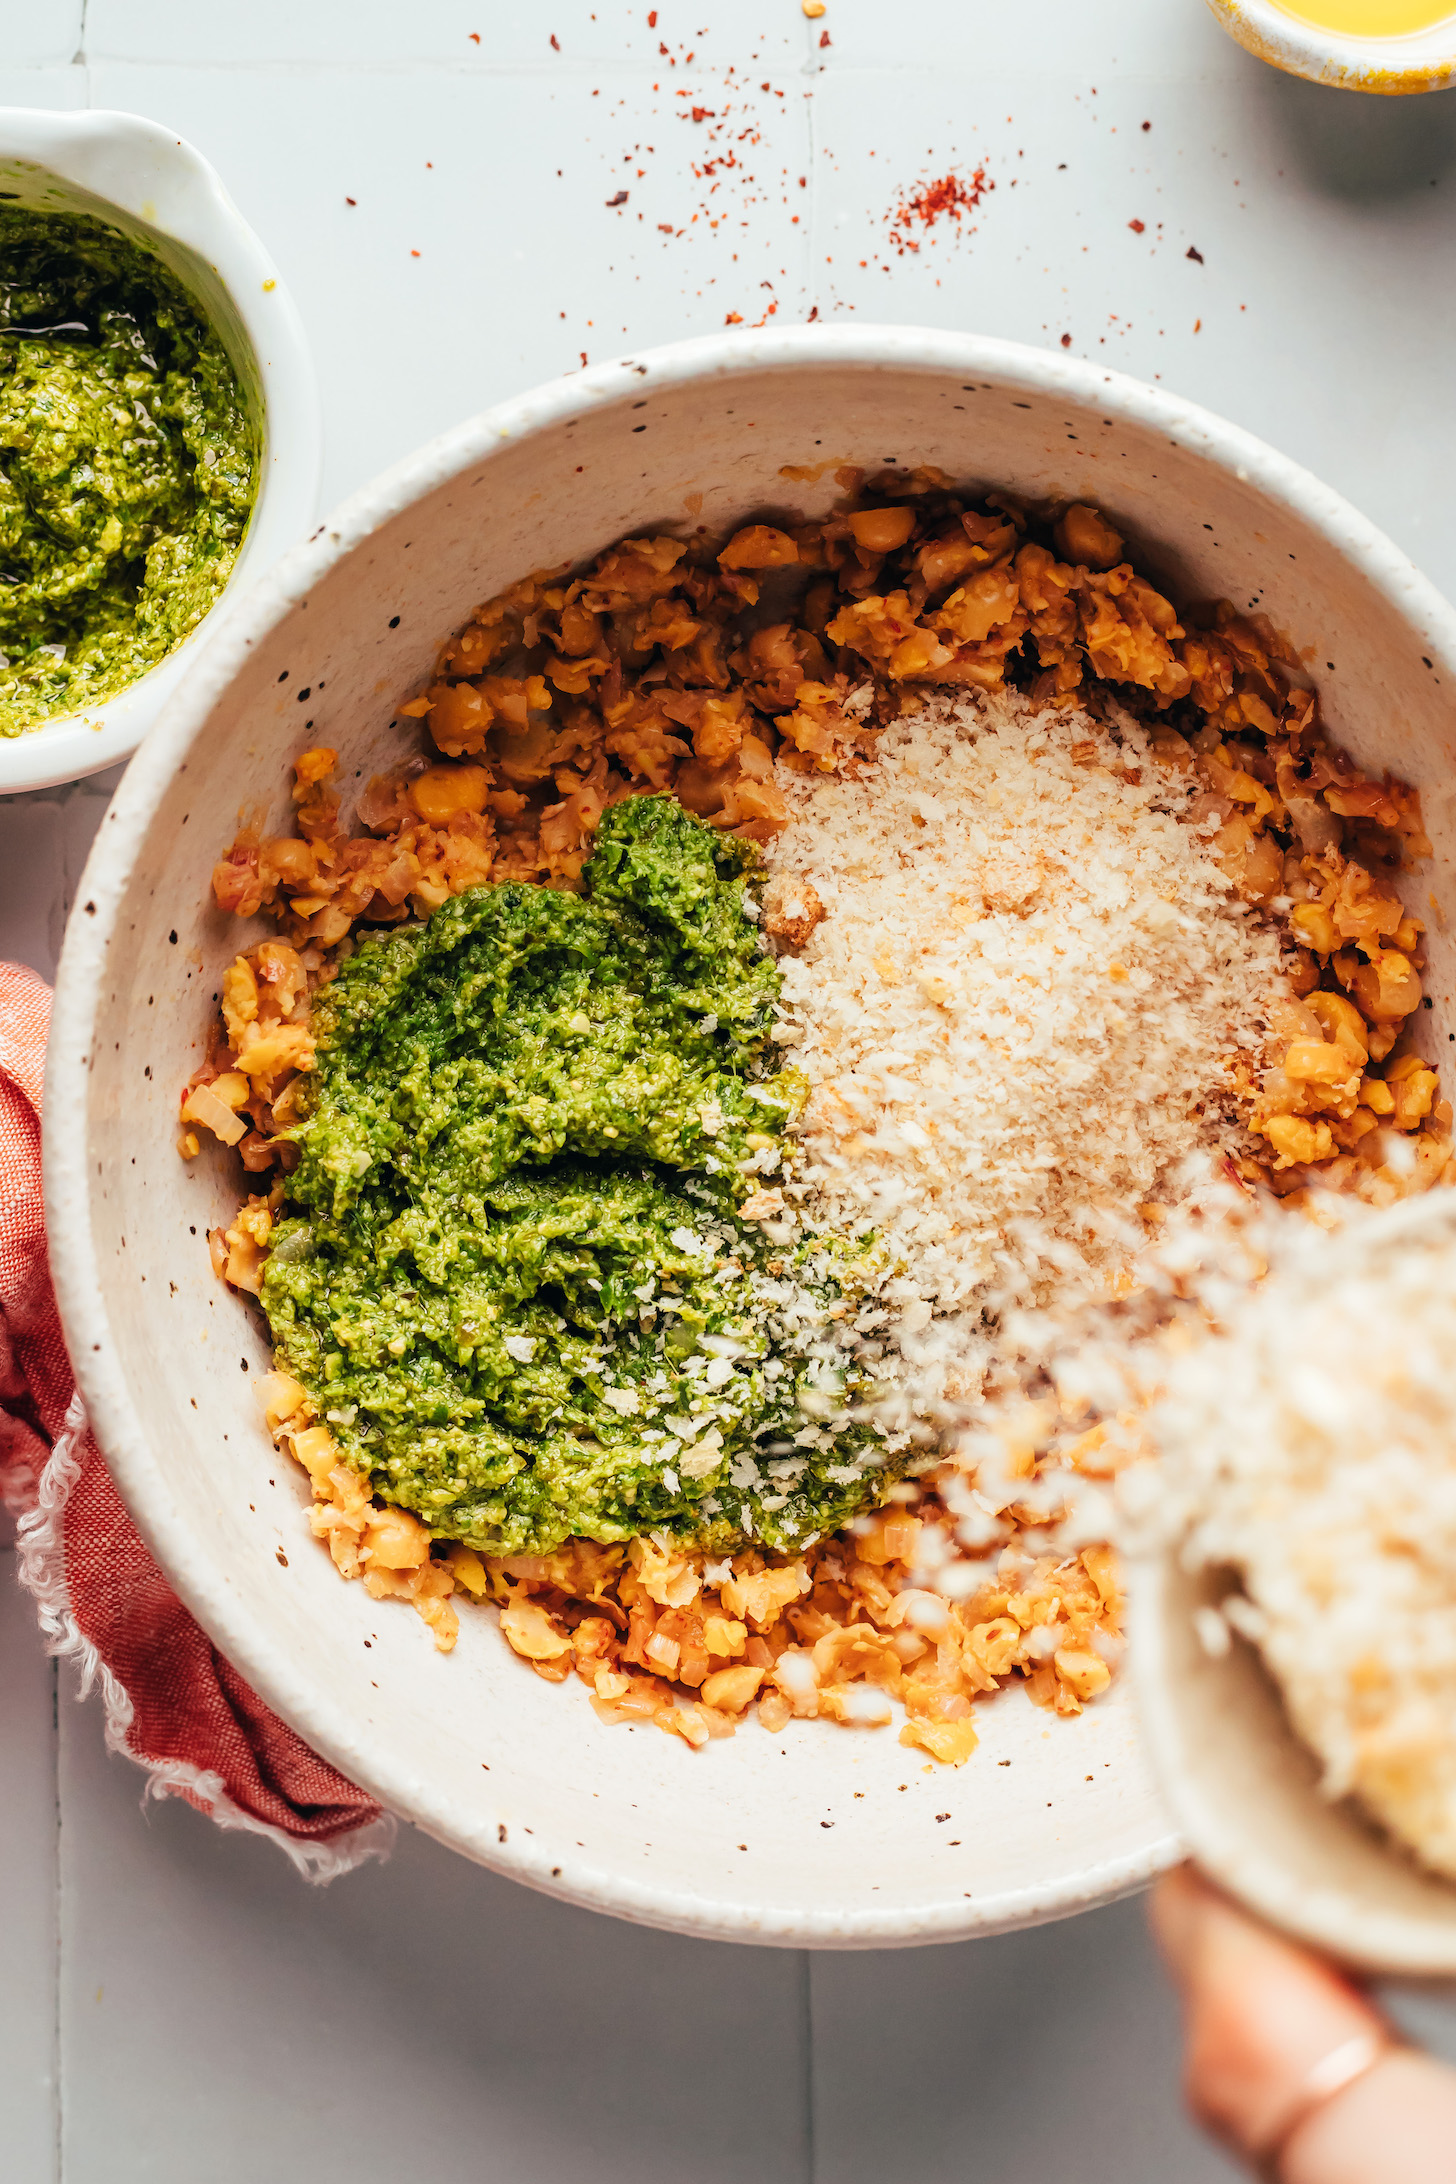 Adding breadcrumbs to a bowl with mashed chickpeas and pesto